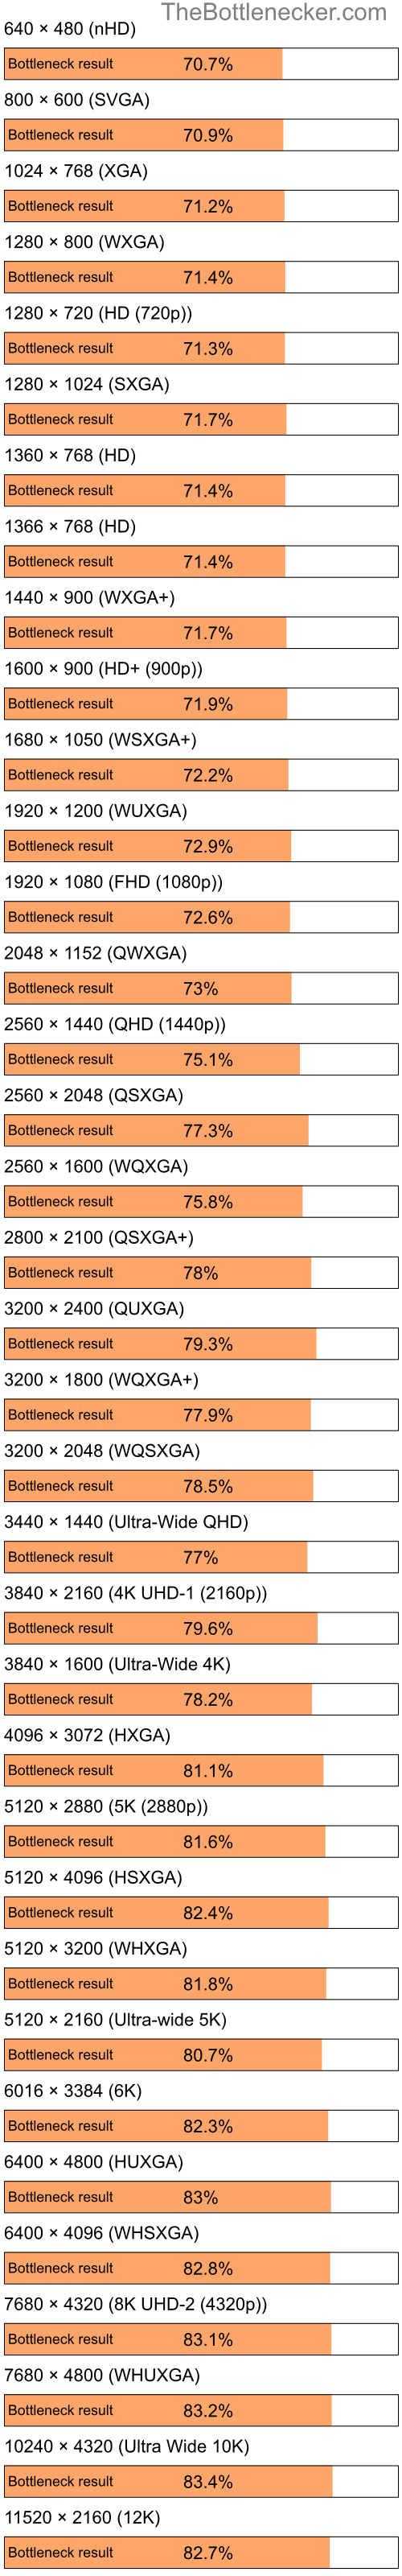 Bottleneck results by resolution for Intel Celeron M and NVIDIA GeForce 8600 GS in Graphic Card Intense Tasks